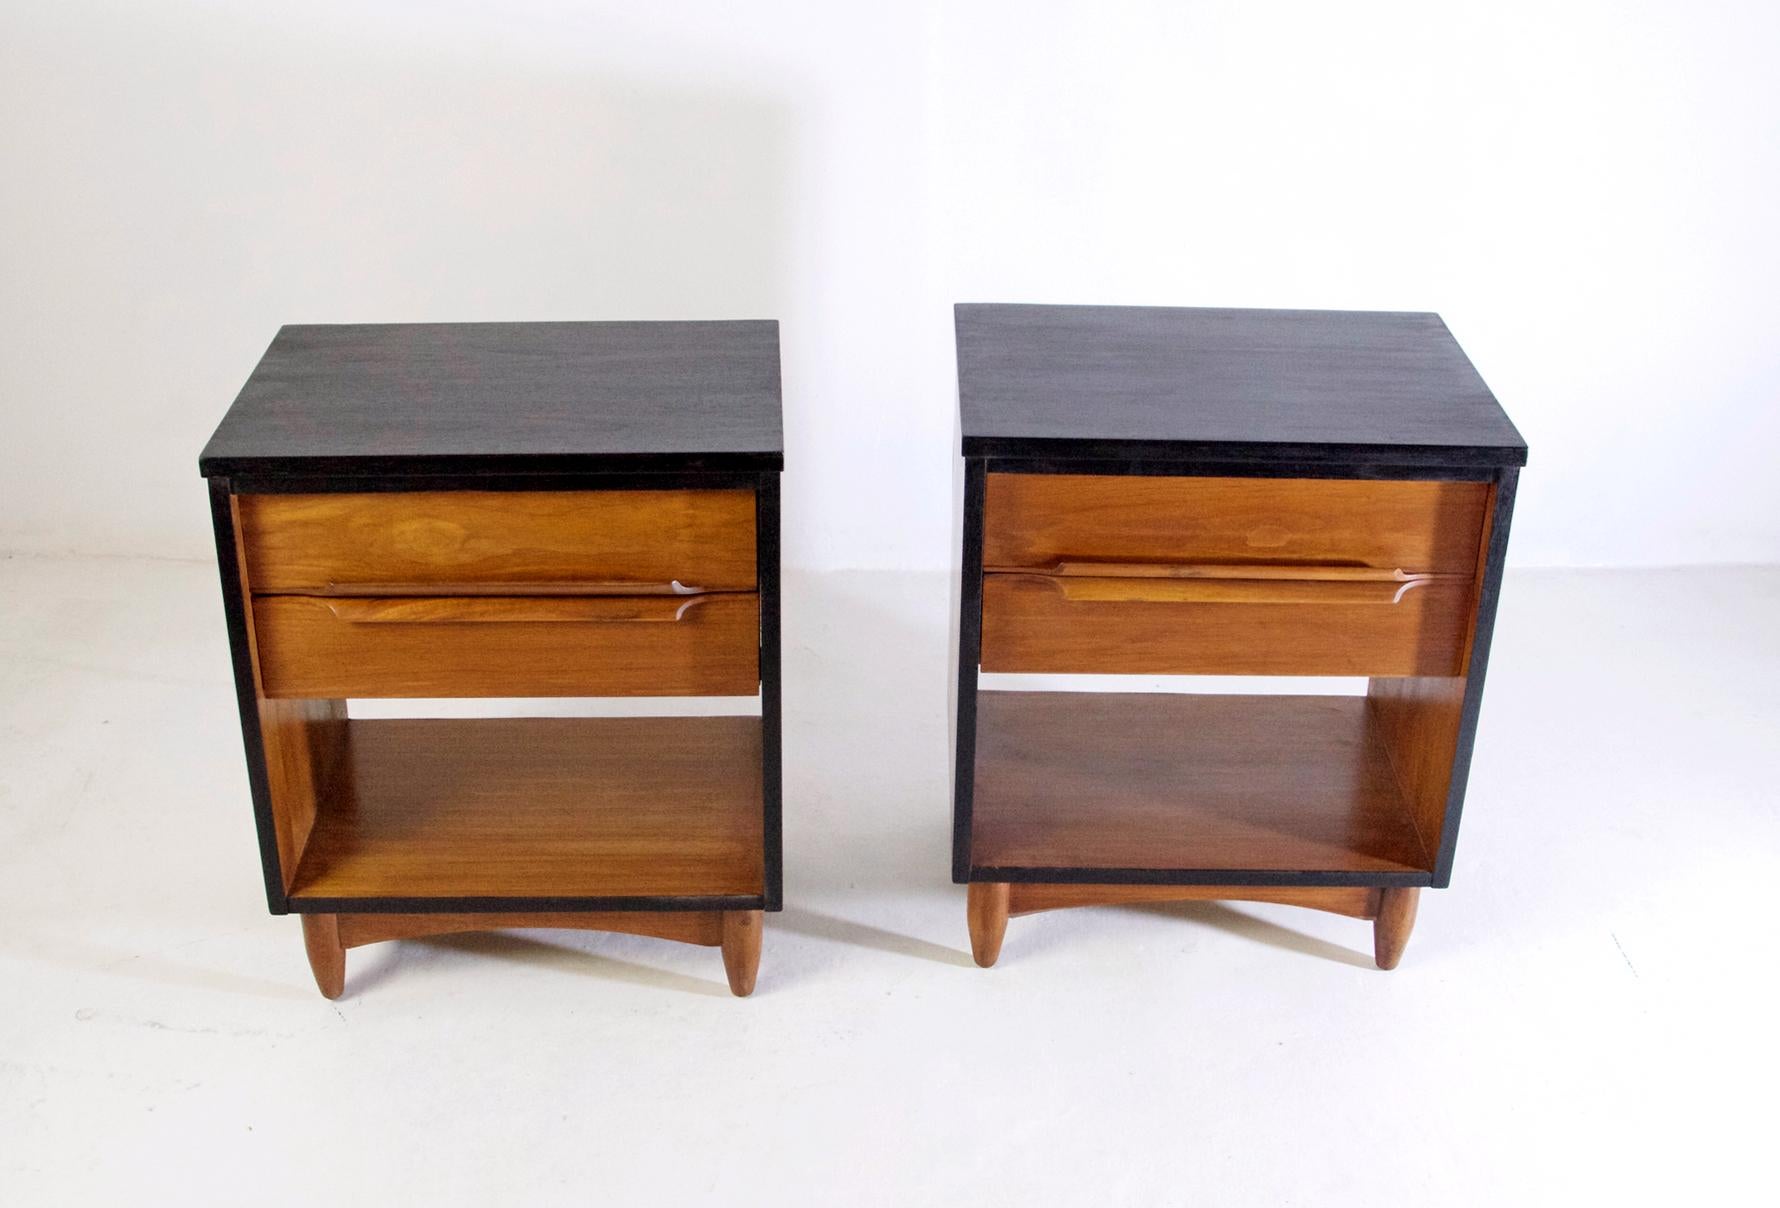 A pair of handmade nightstands in teak from the 1950's with an ebonized frame.  Each nightstand has a pair of drawers and are in excellent restored condition. There is also a matching dresser for this pair.